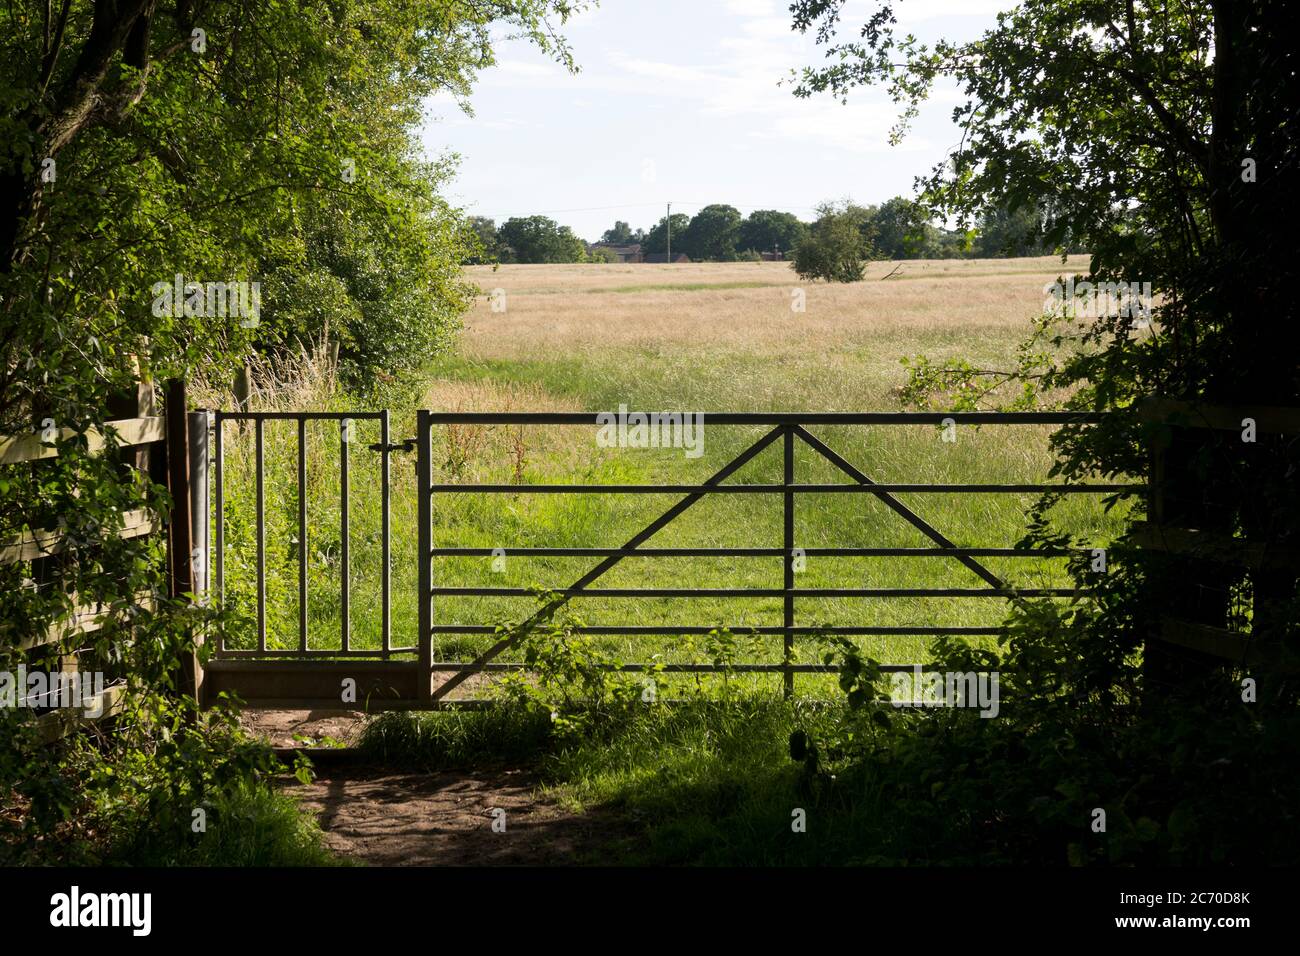 Metal gates on a public footpath in Warwickshire countryside, UK Stock Photo